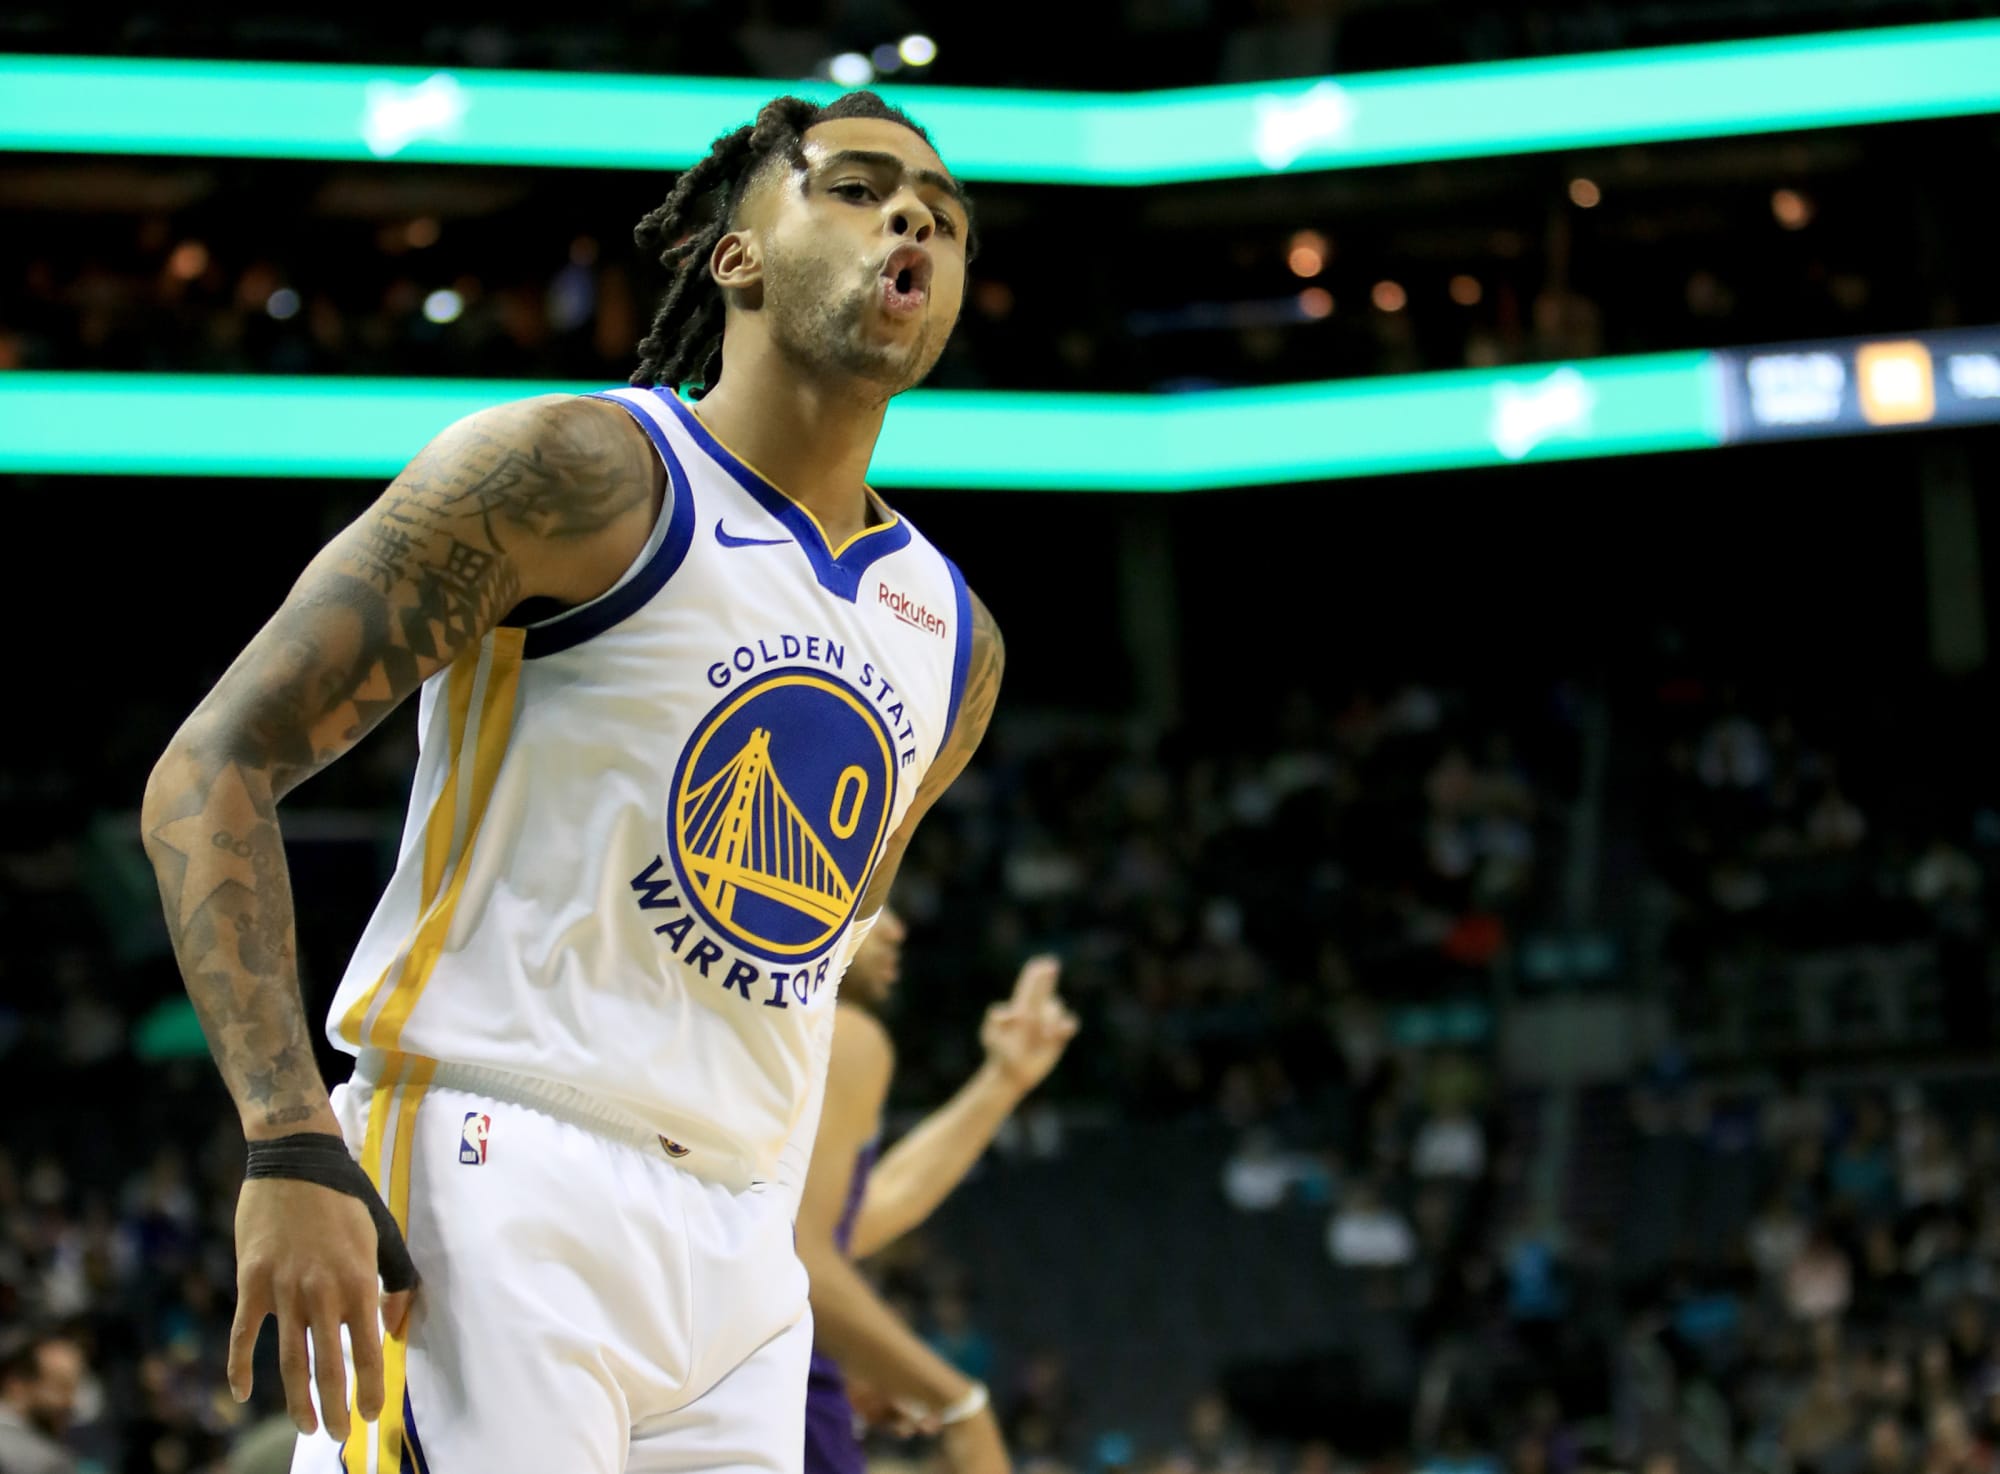 NBA rumors: Could the Warriors trade D'Angelo Russell for high